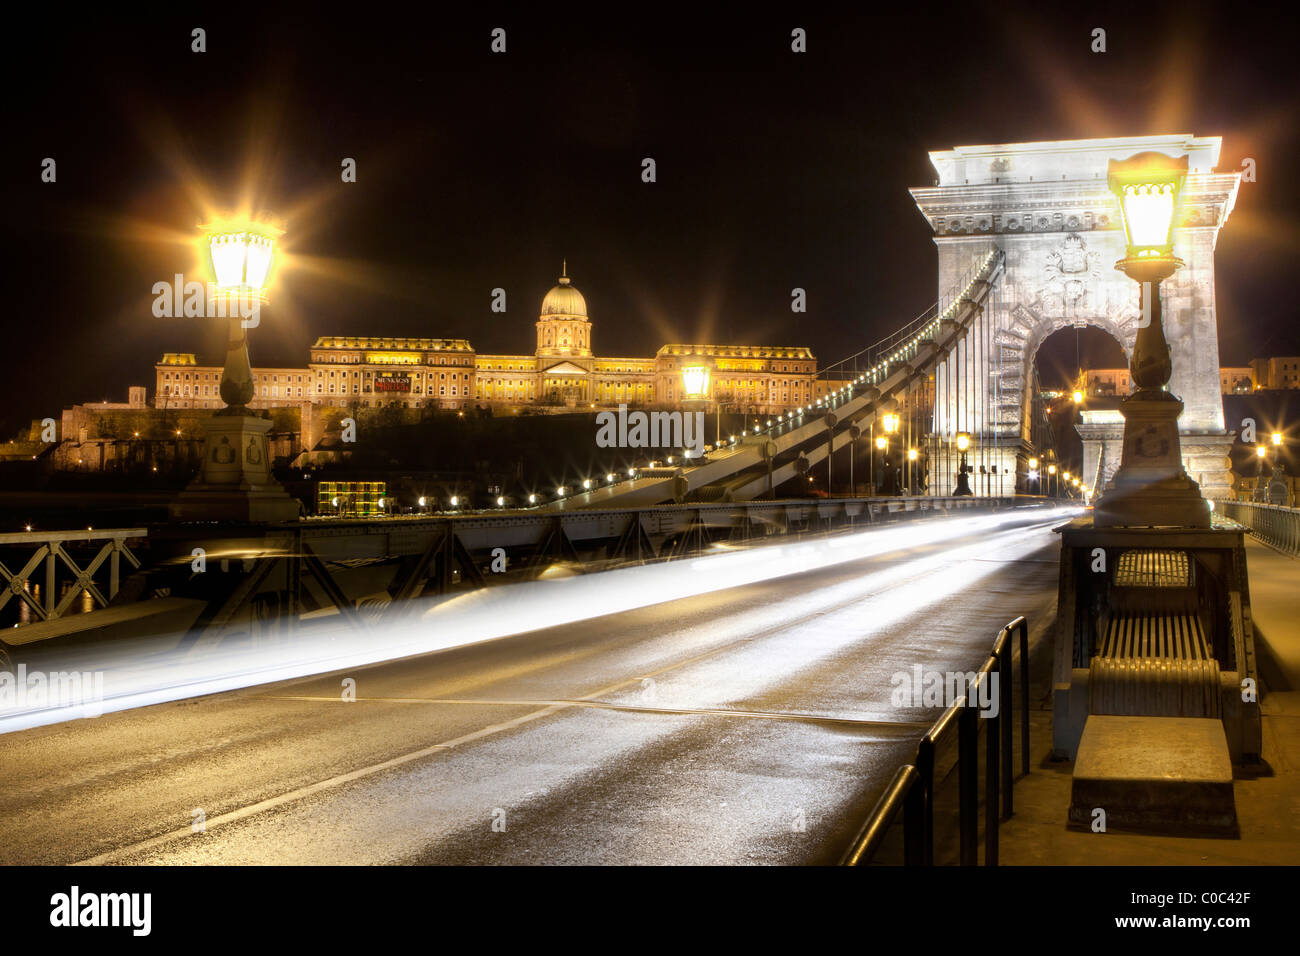 Chain Bridge at night in Budapest with The Royal Palace/Buda Castle in the background Stock Photo